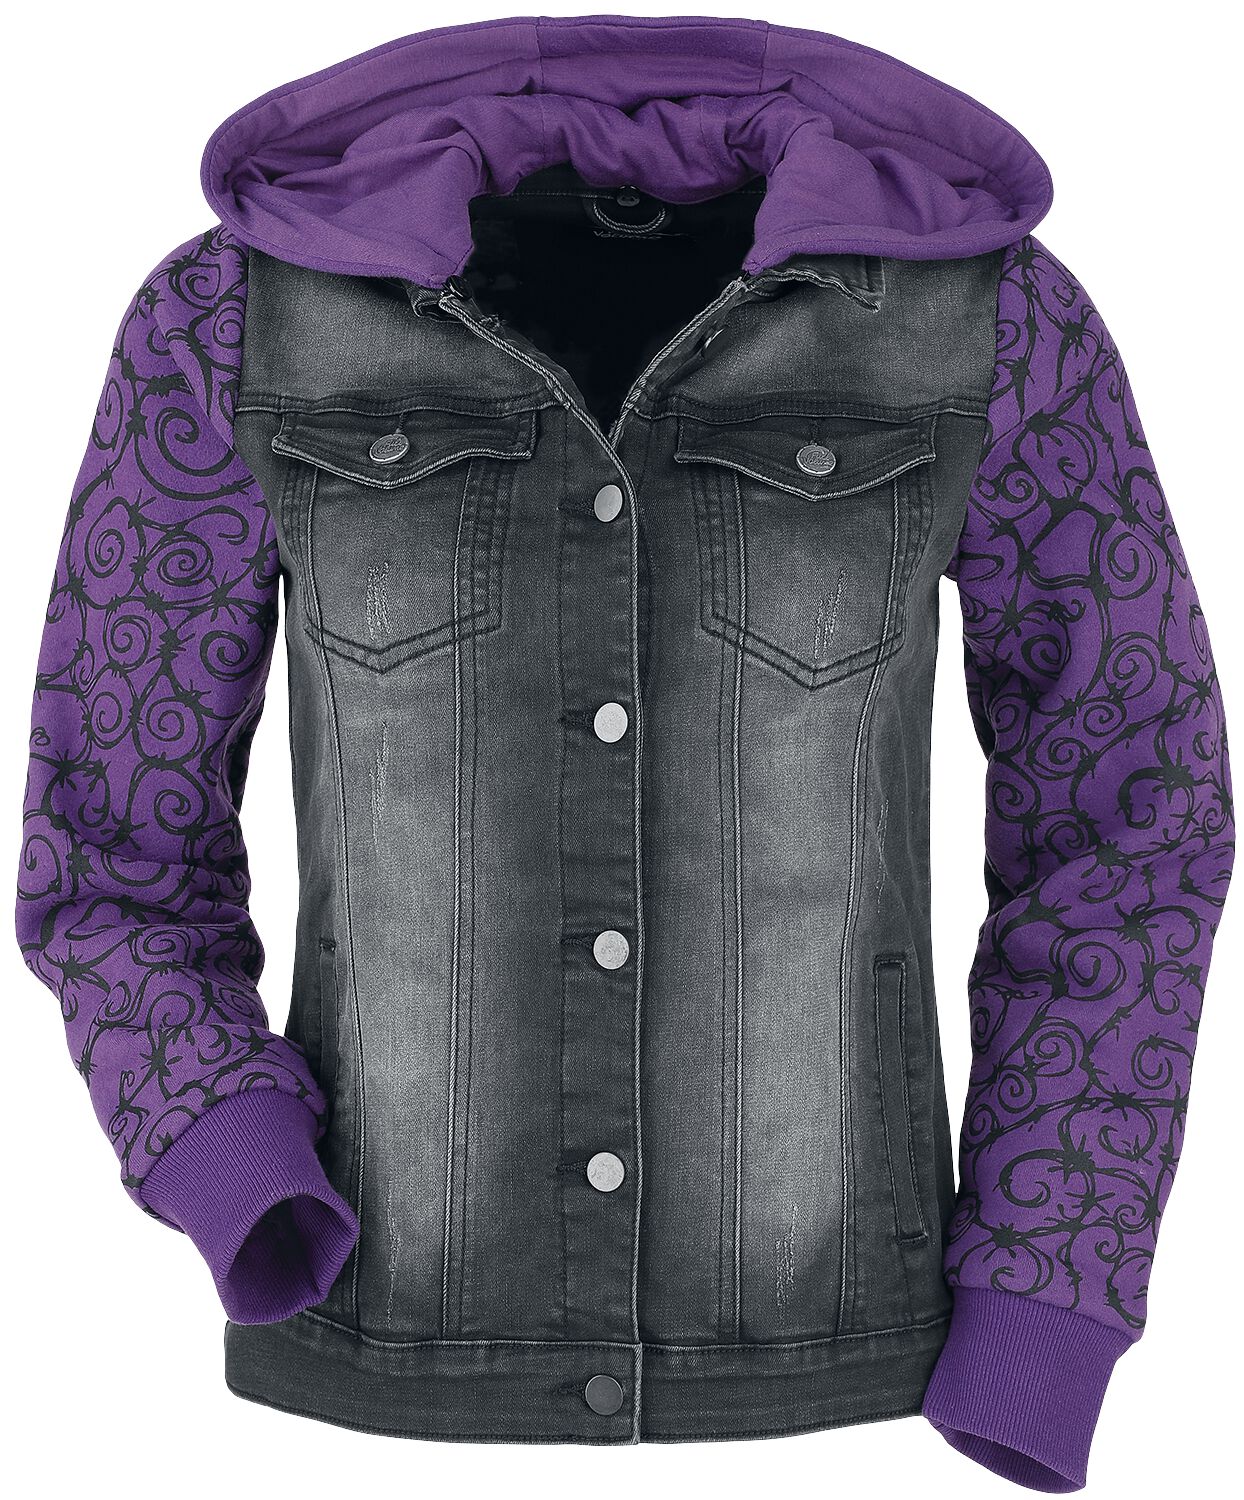 Image of Giubbetto di jeans di Full Volume by EMP - Denim Jacket with Sweat Sleeves and Hood - XS a 5XL - Donna - nero/viola